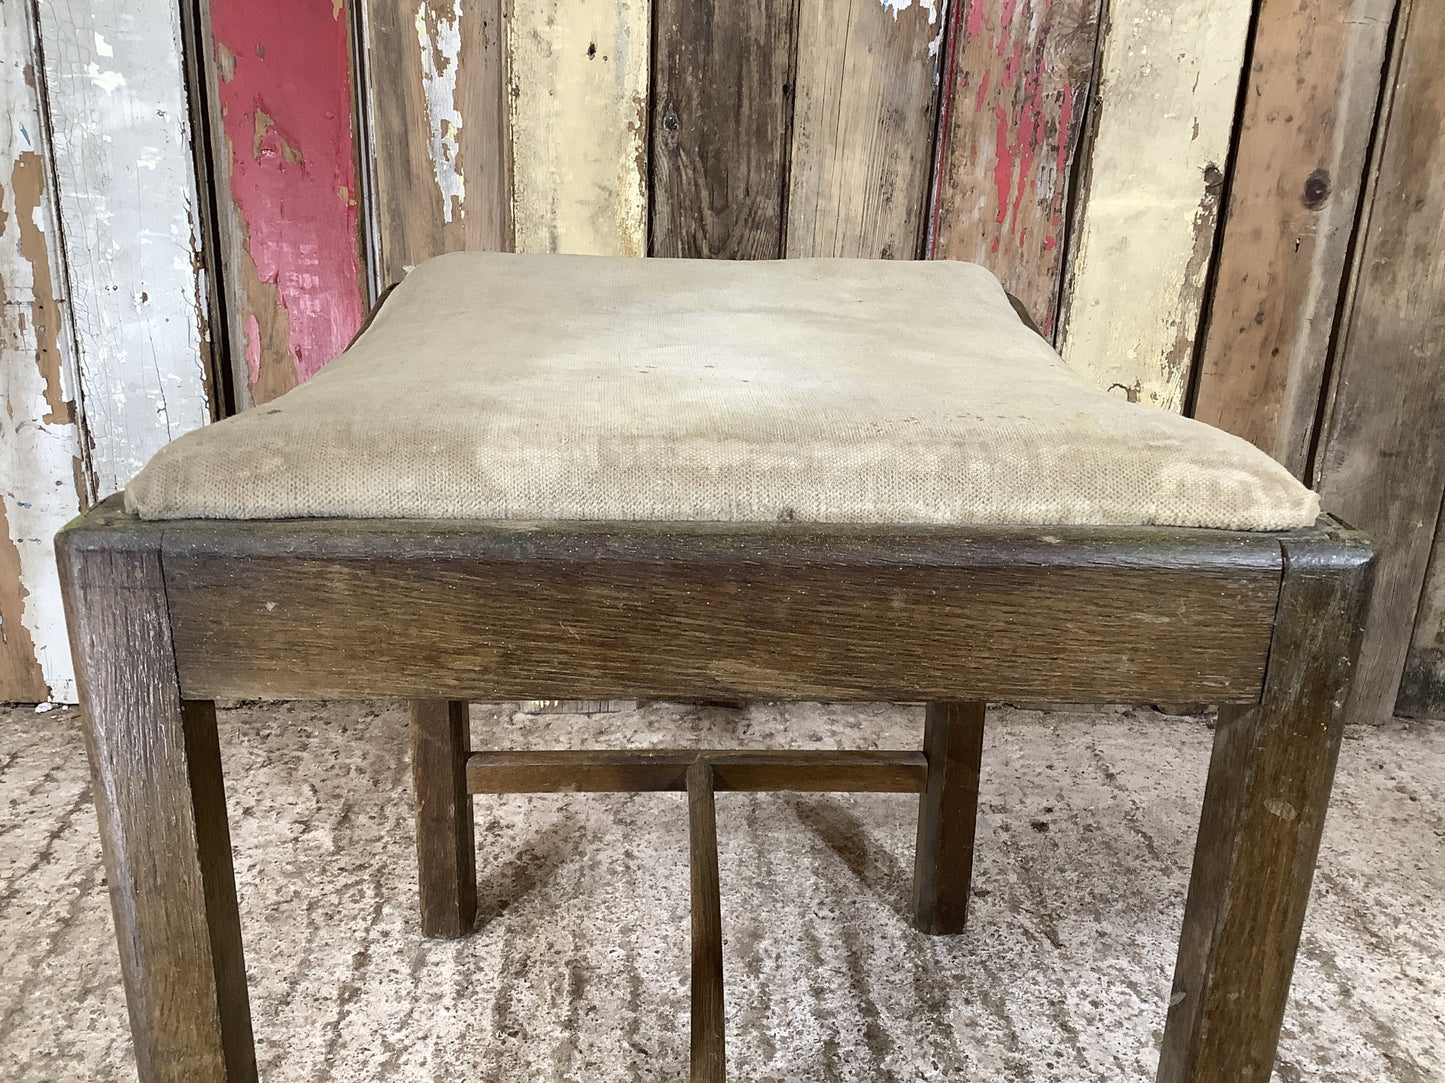 Low Oak Stool 17” With Soft Seat Pad With Four Square Legged Stool 1930’s Style